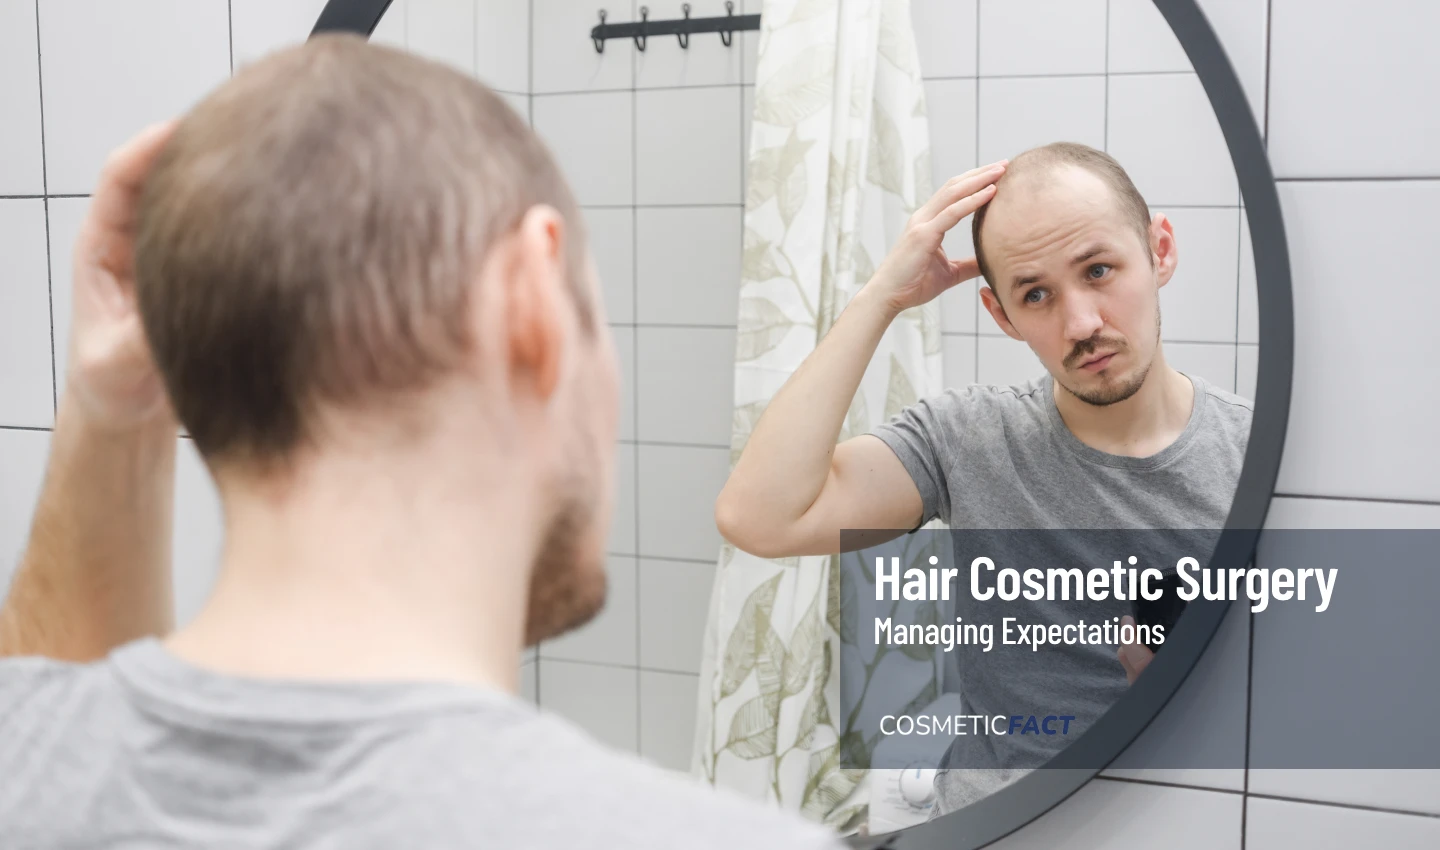 A man looking at his hair in the mirror after a hair transplant surgery, emphasizing the importance of realistic hair transplant expectations.